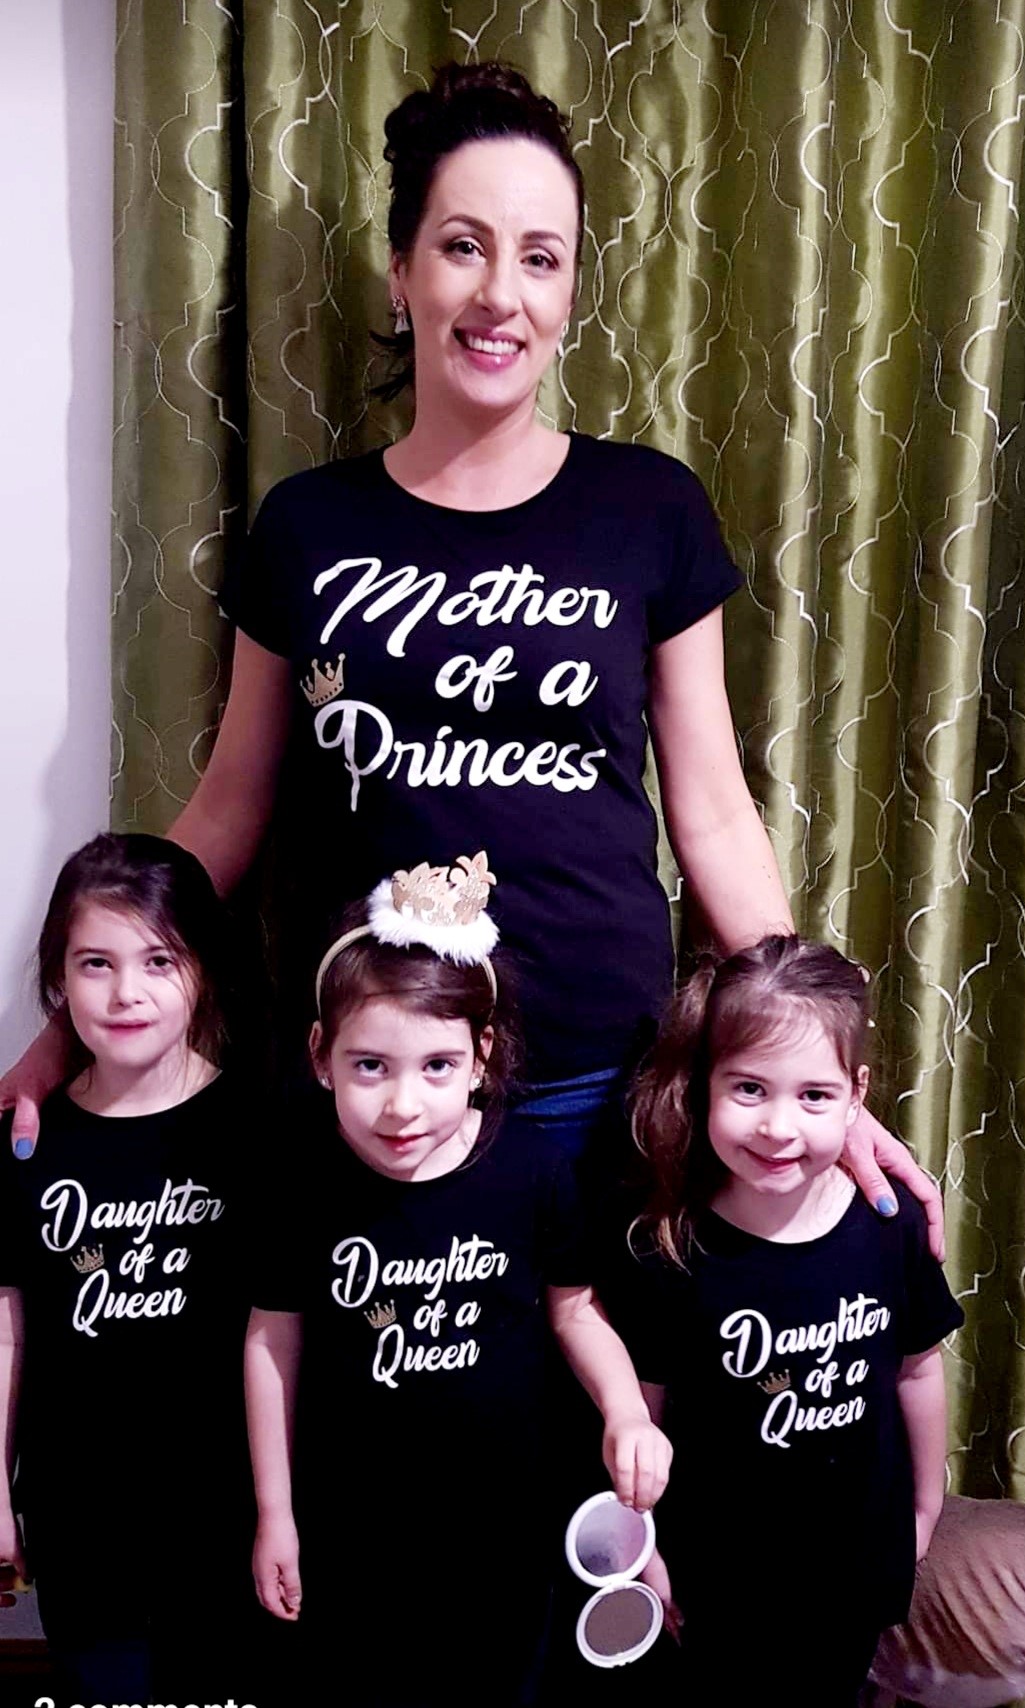 Image shows Helen standing with her three daughters.